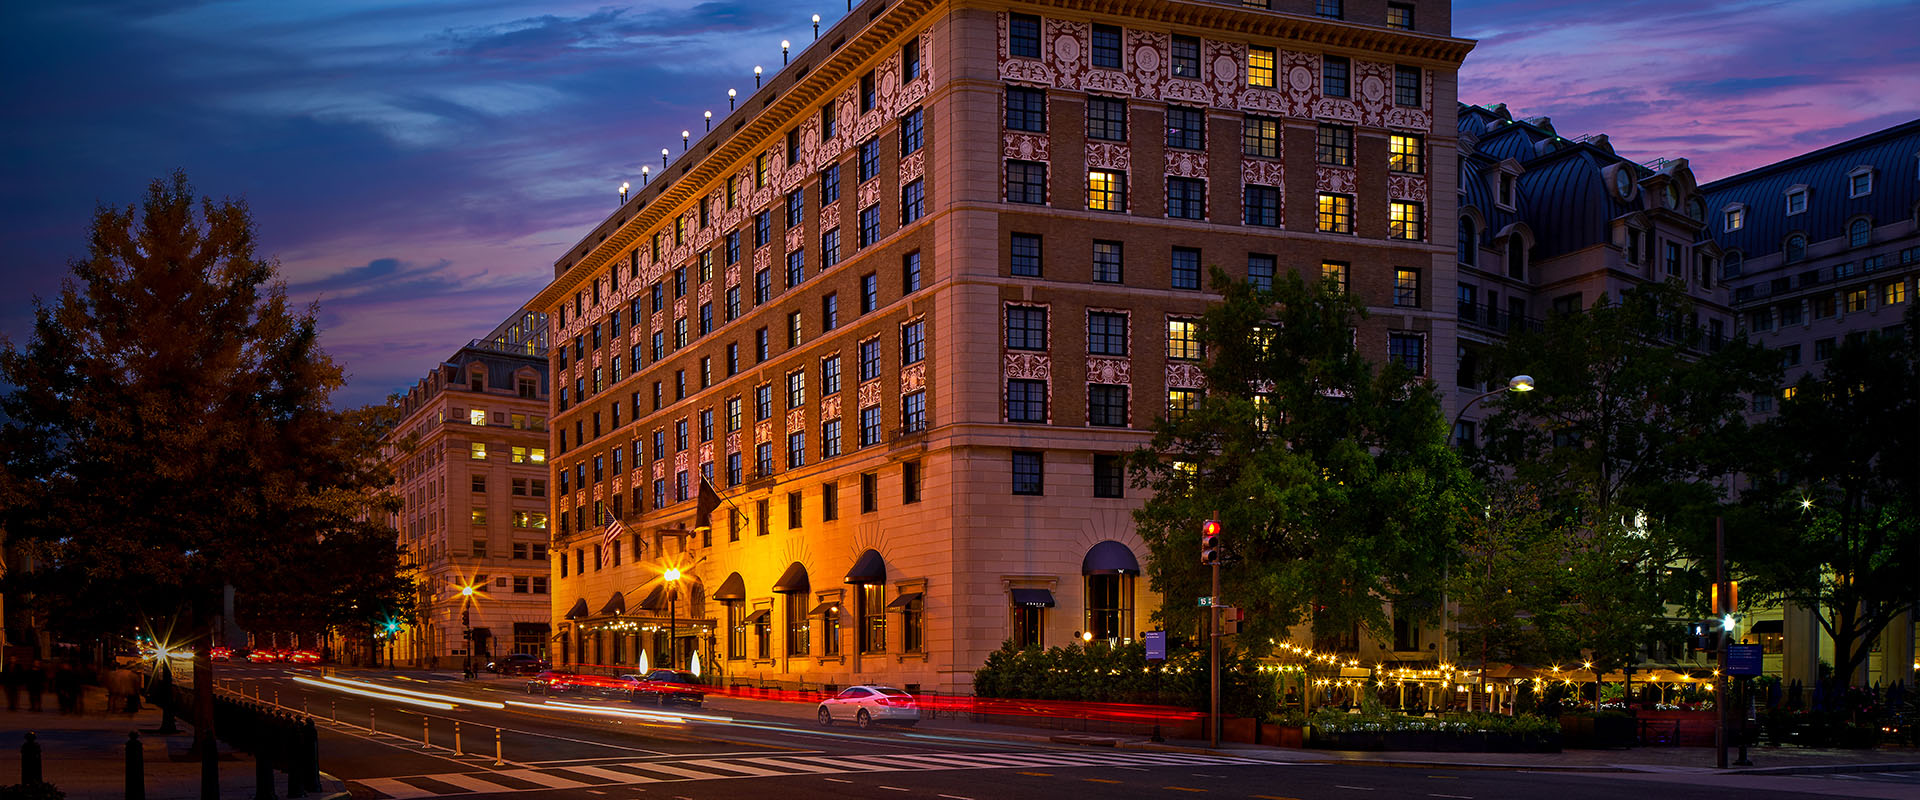 Hotel Washington | Home | Hotels By The White House in Washington DC